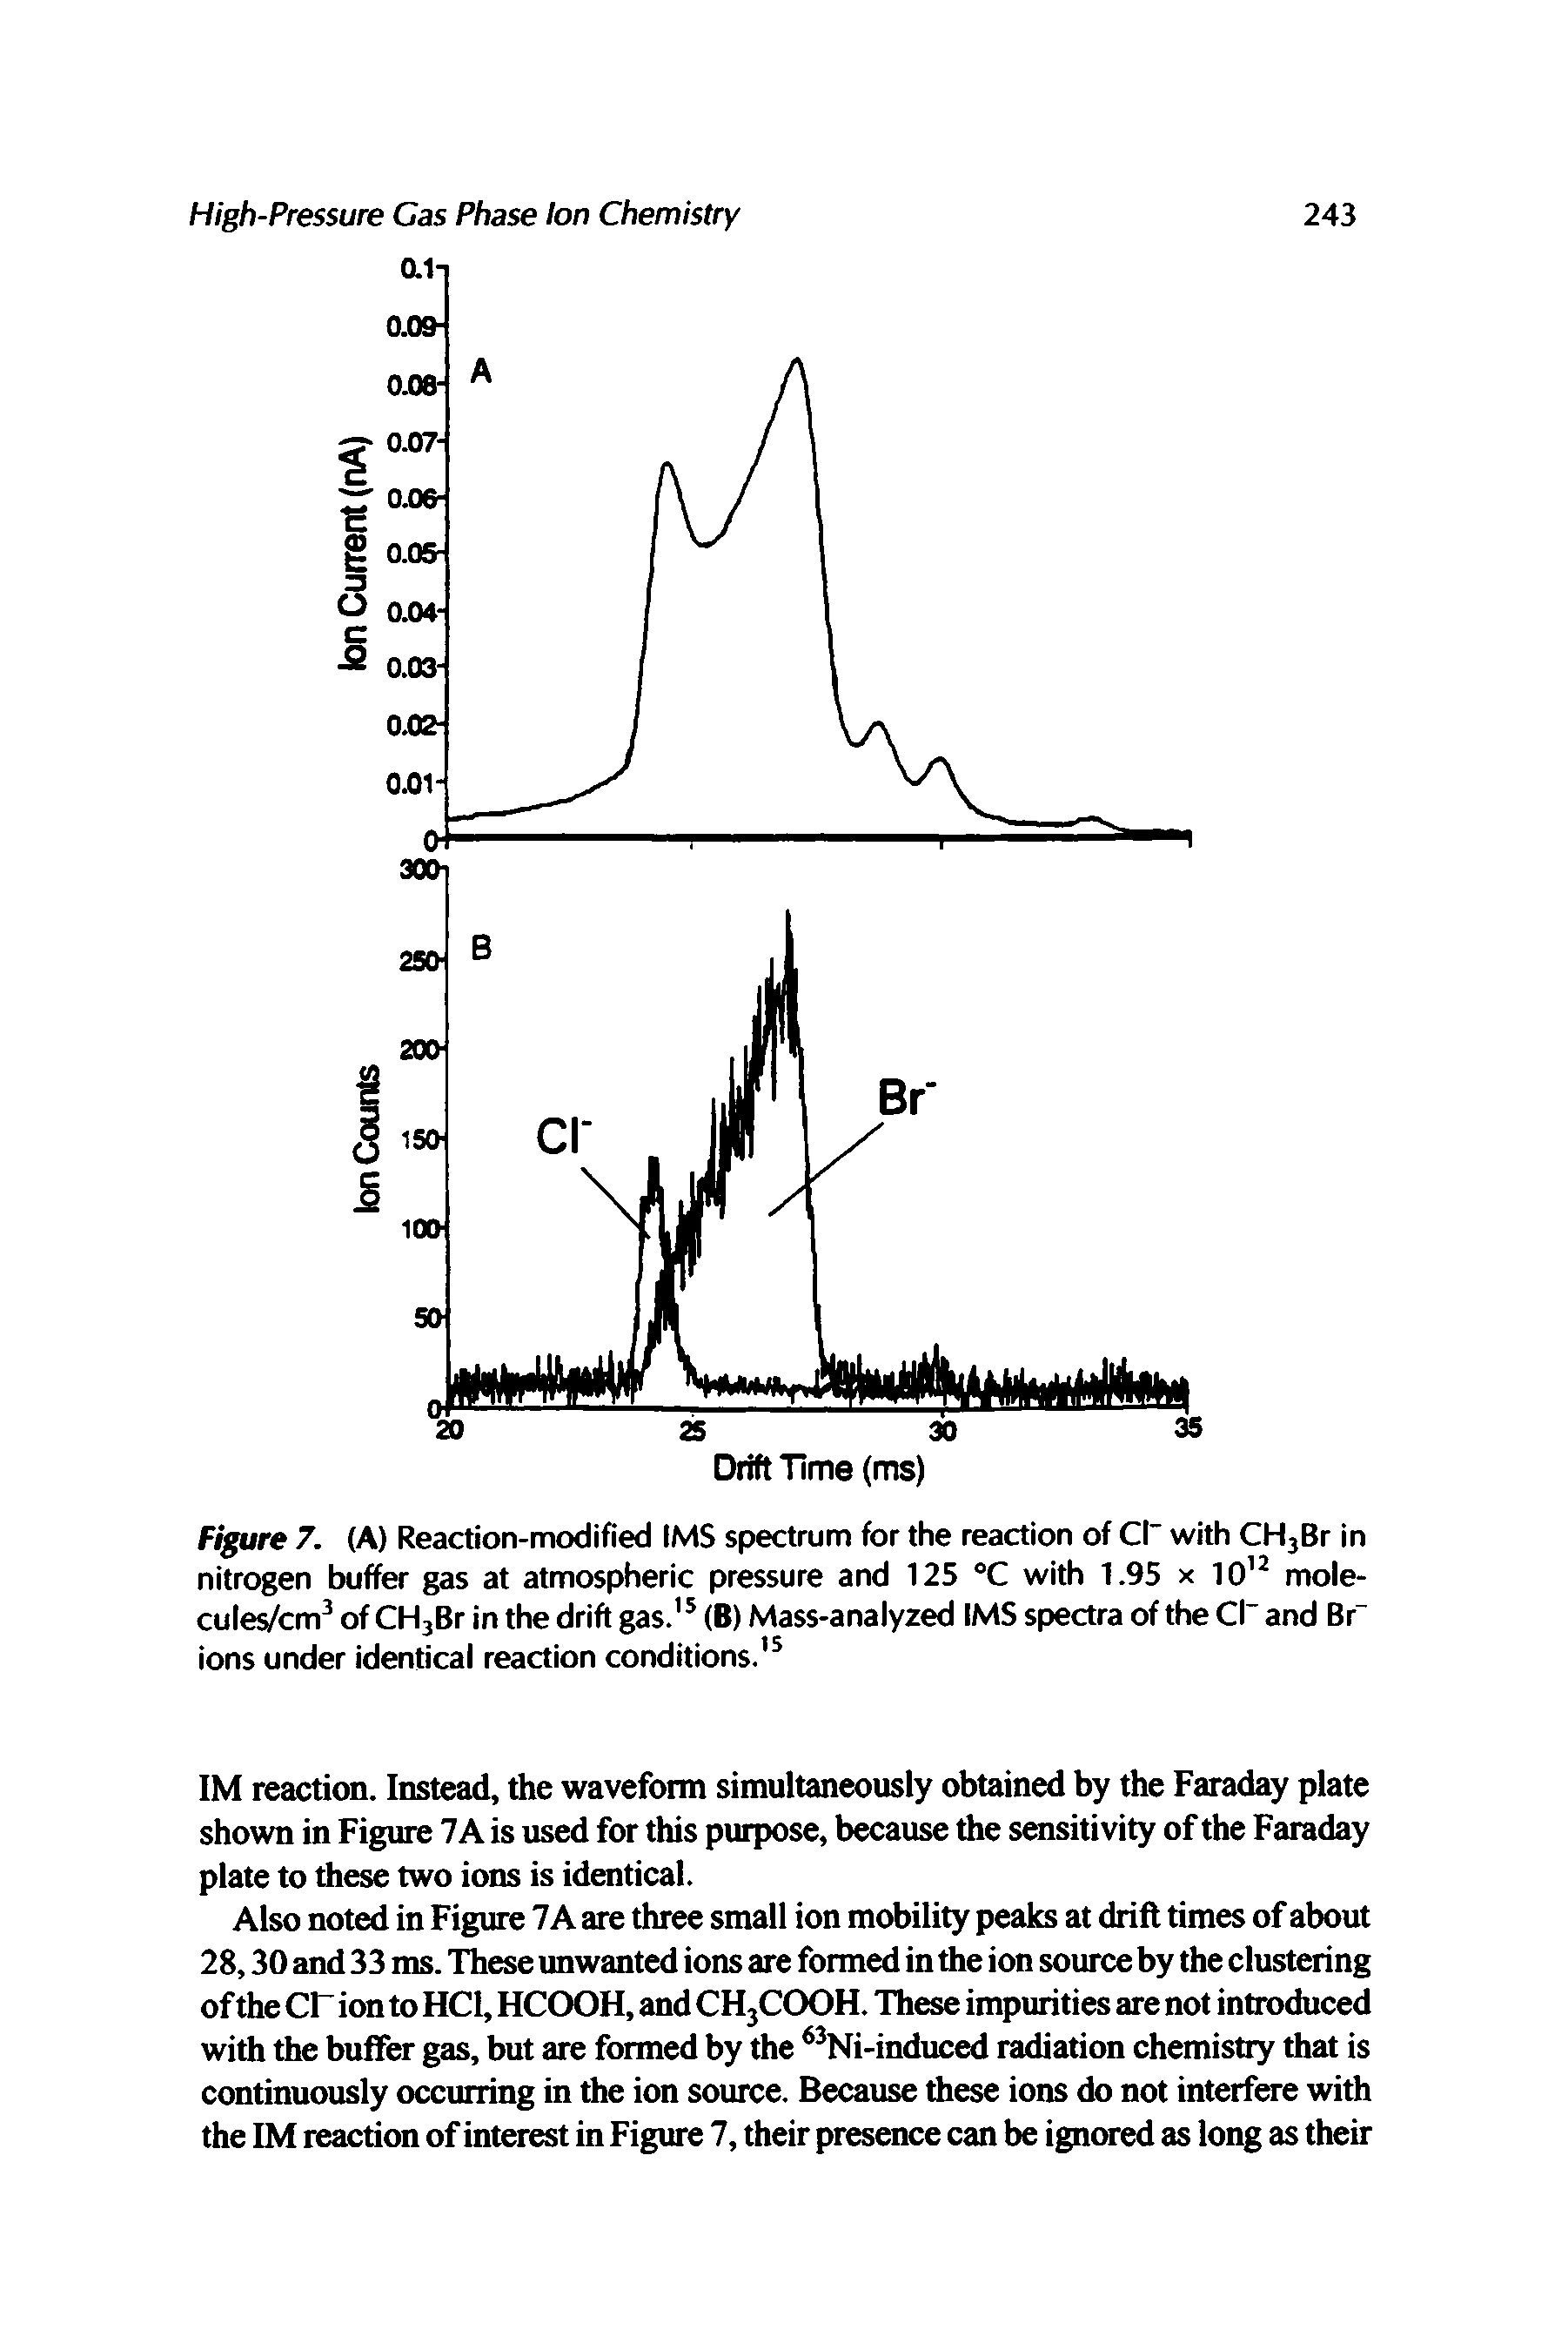 Figure 7. (A) Reaction-modified IMS spectrum for the reaction of Cl" with CHjBr in nitrogen buffer gas at atmospheric pressure and 125 °C with 1.95 x 10 mole-cules/cm of CHjBr in the drift gas. (B) Mass-analyzed IMS spectra of the Cl" and Br" ions under identical reaction conditions. ...